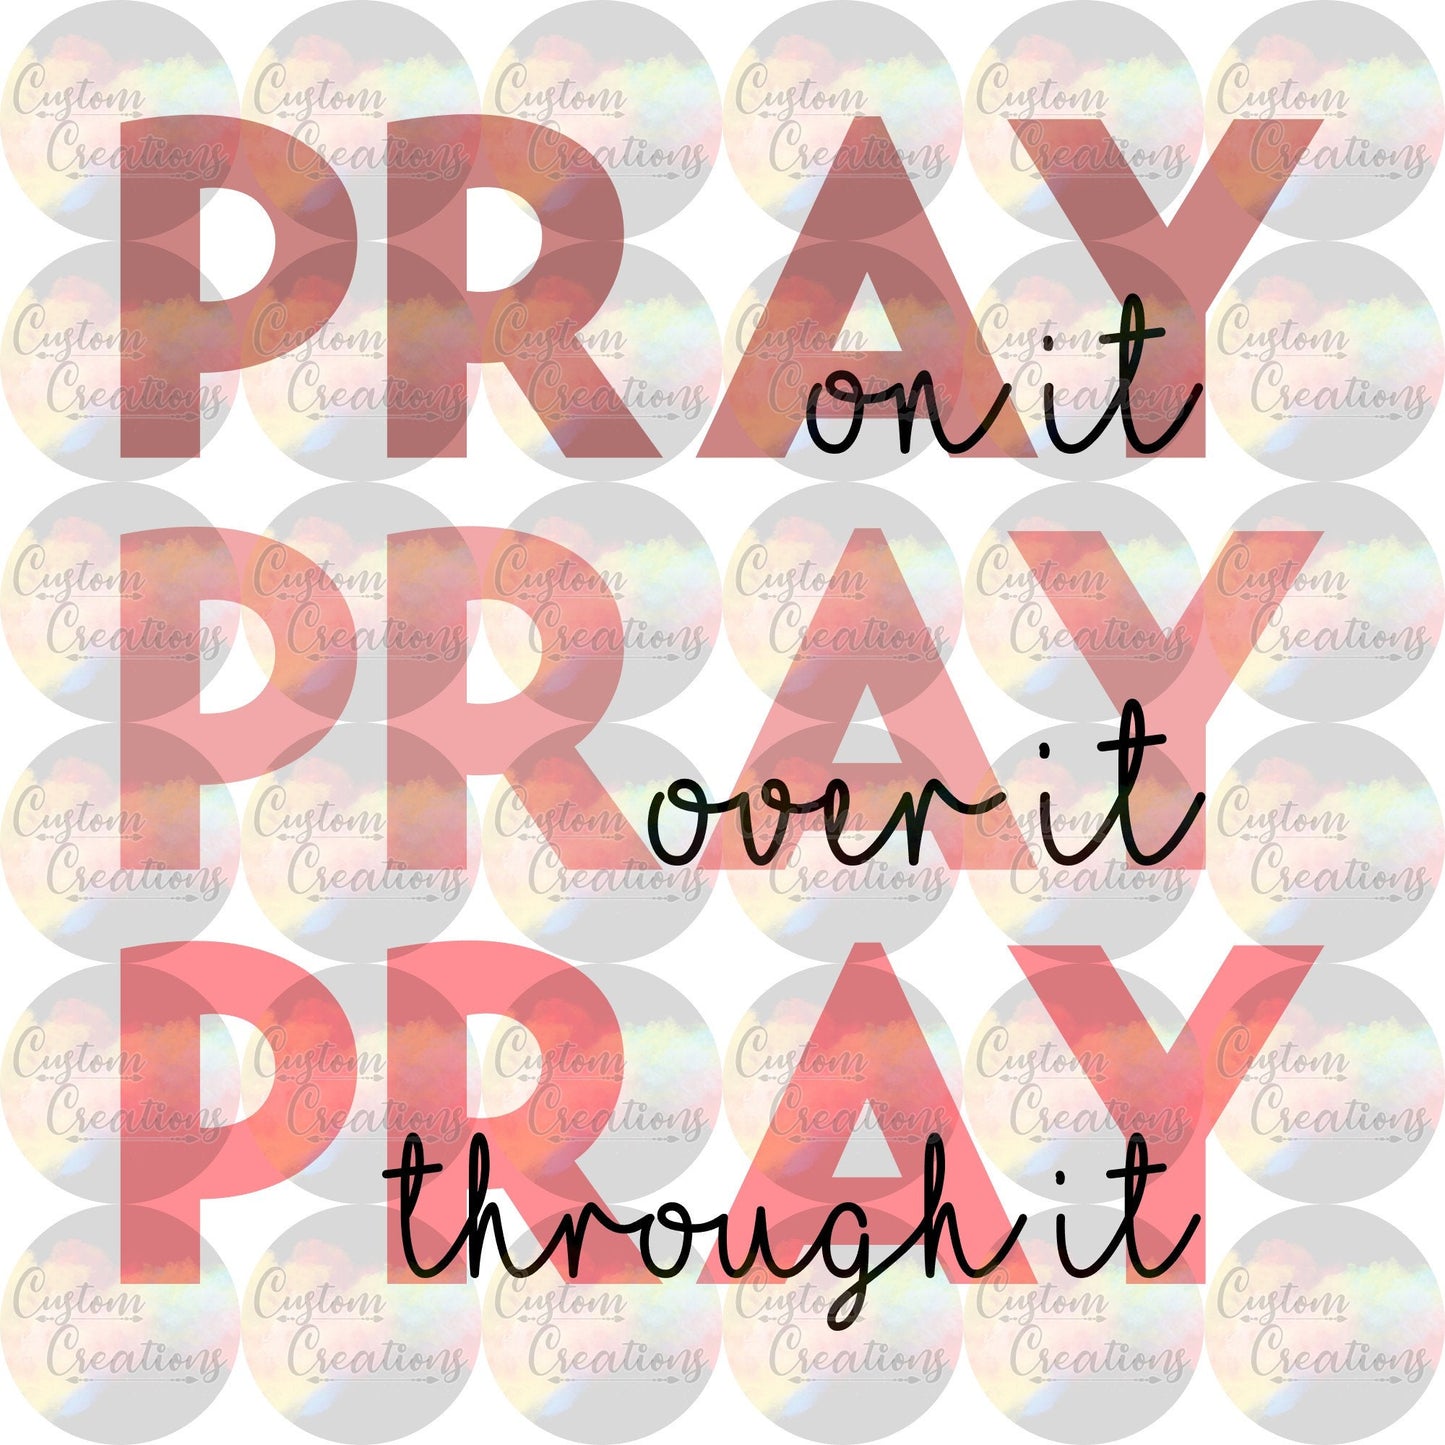 Pray On It Pray Over It Pray Through It 3.5" Clear Laser Printed Waterslide